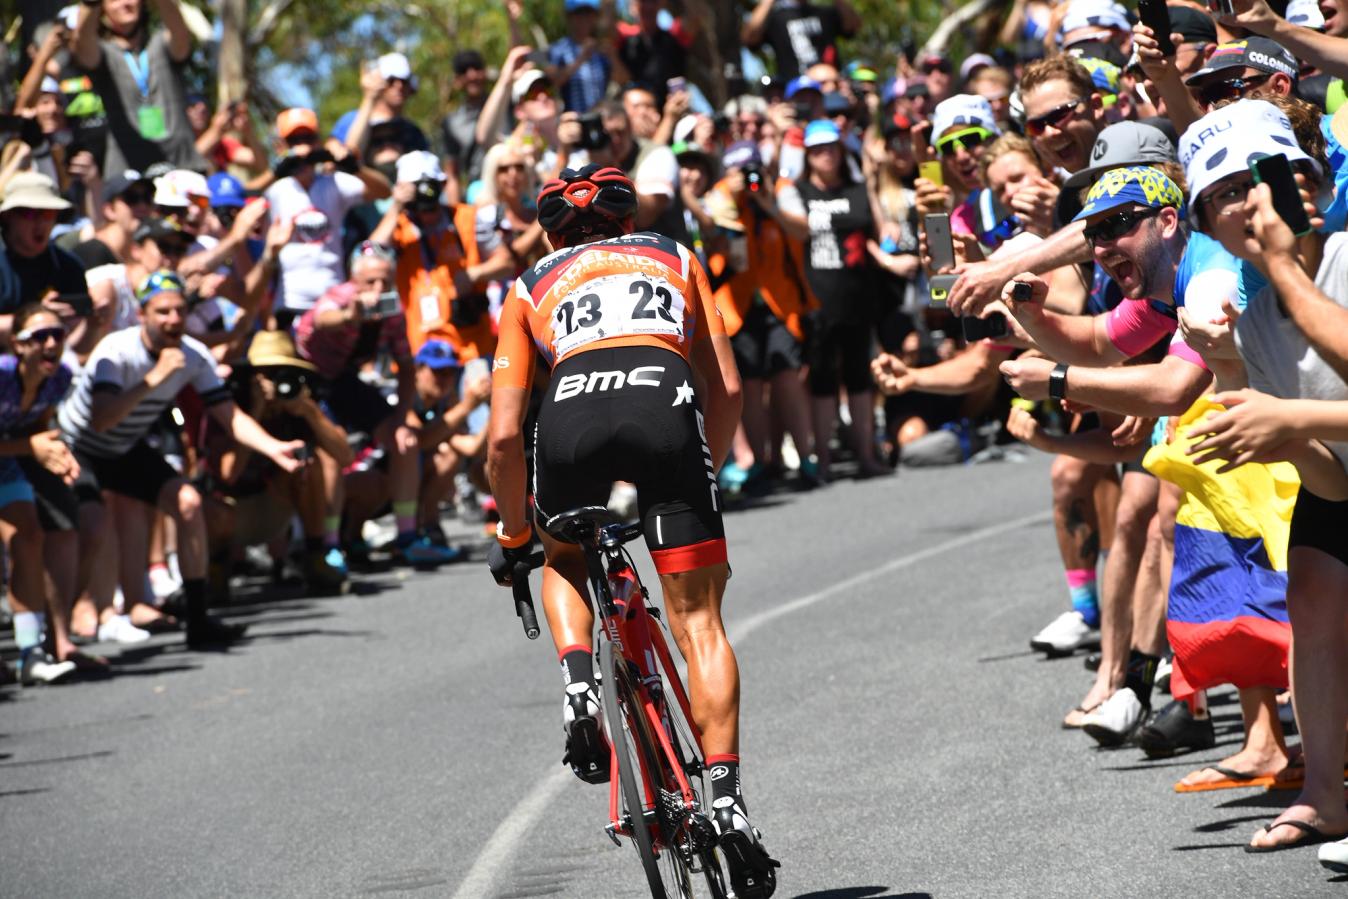 Porte won on Willunga for six years running between 2013 and 2019